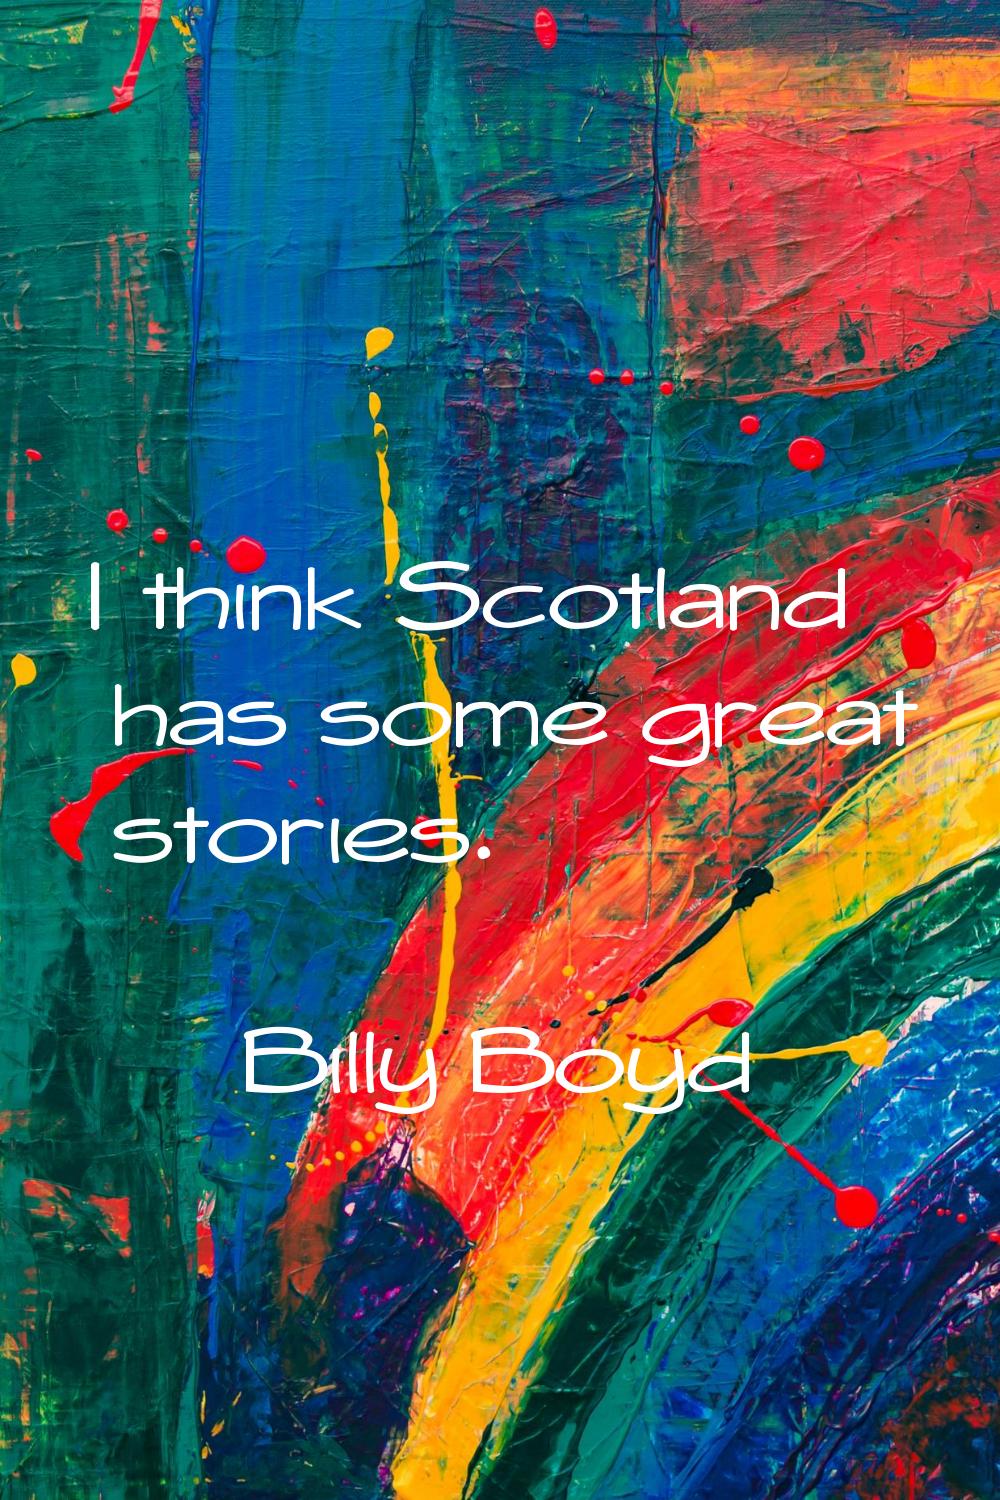 I think Scotland has some great stories.